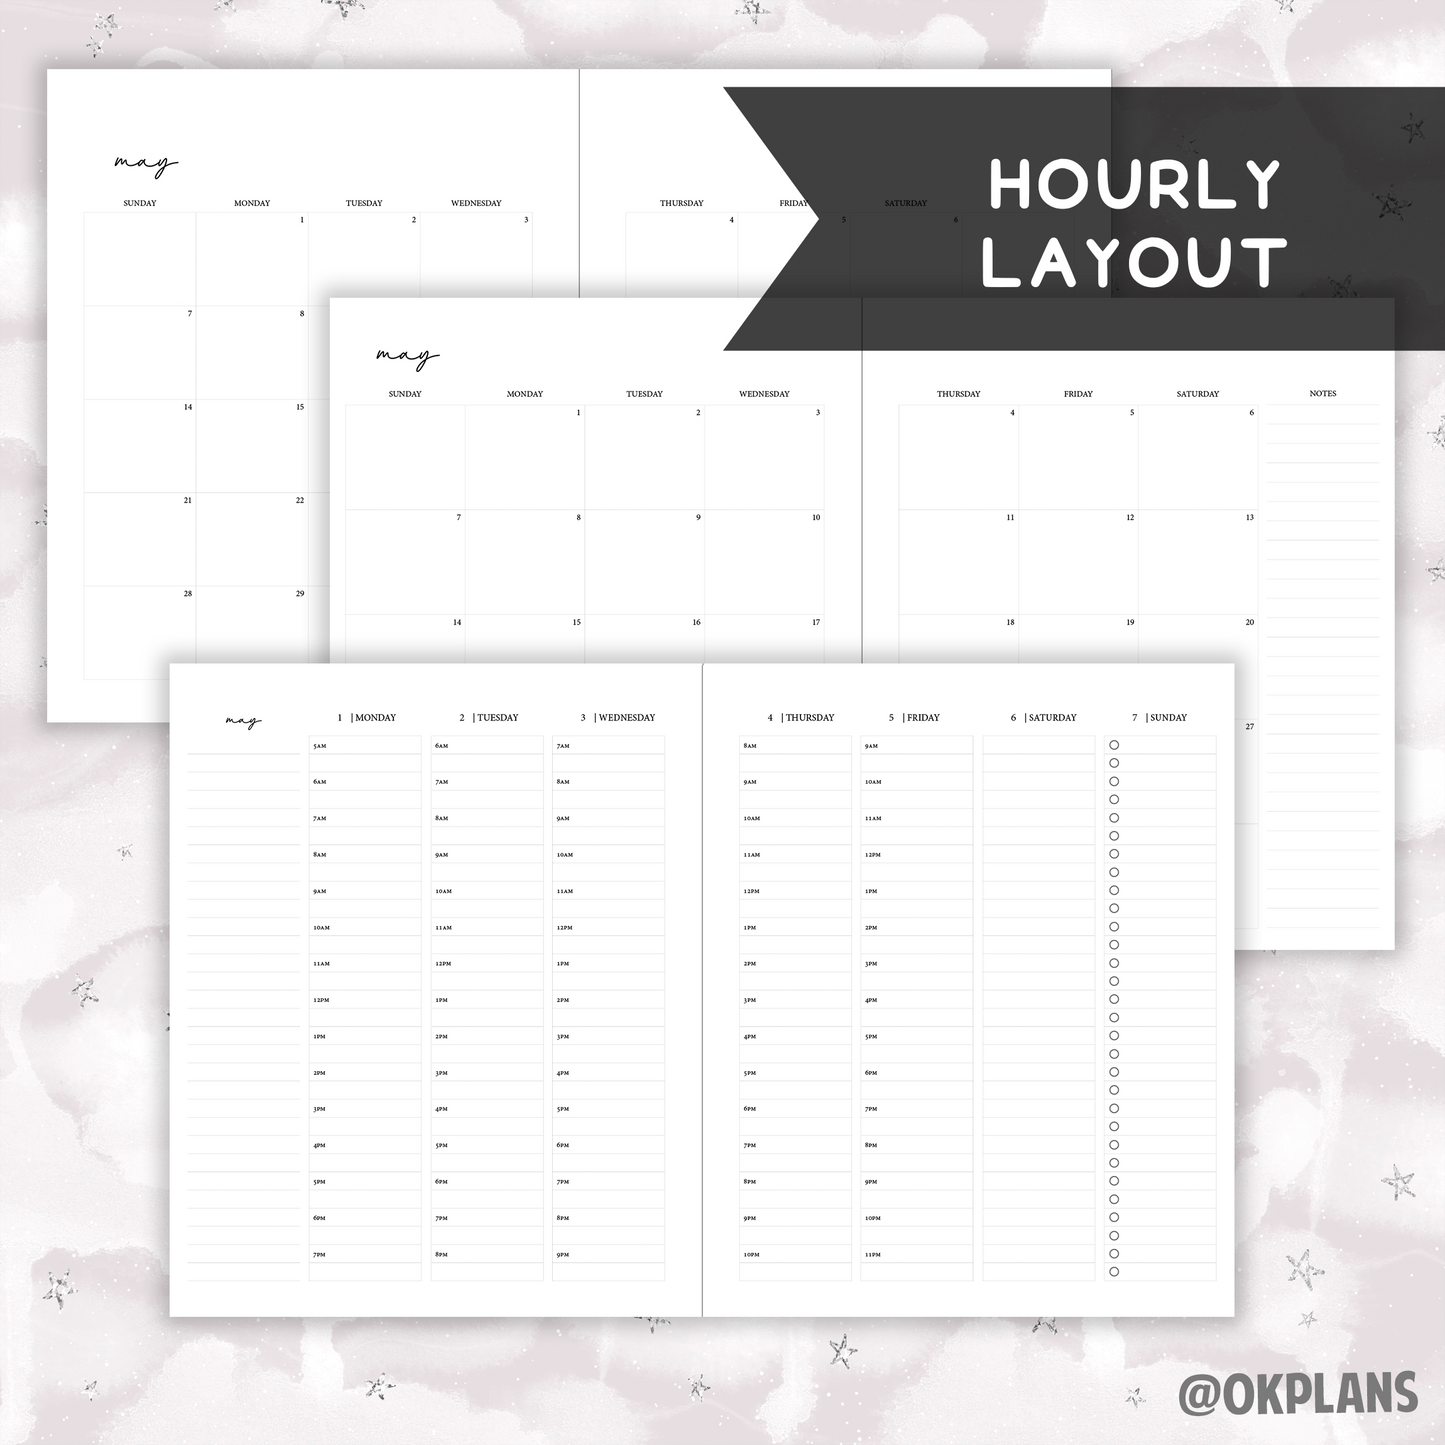 *DATED* 7x9 Weekly Planner - Pick Monthly and Weekly Option